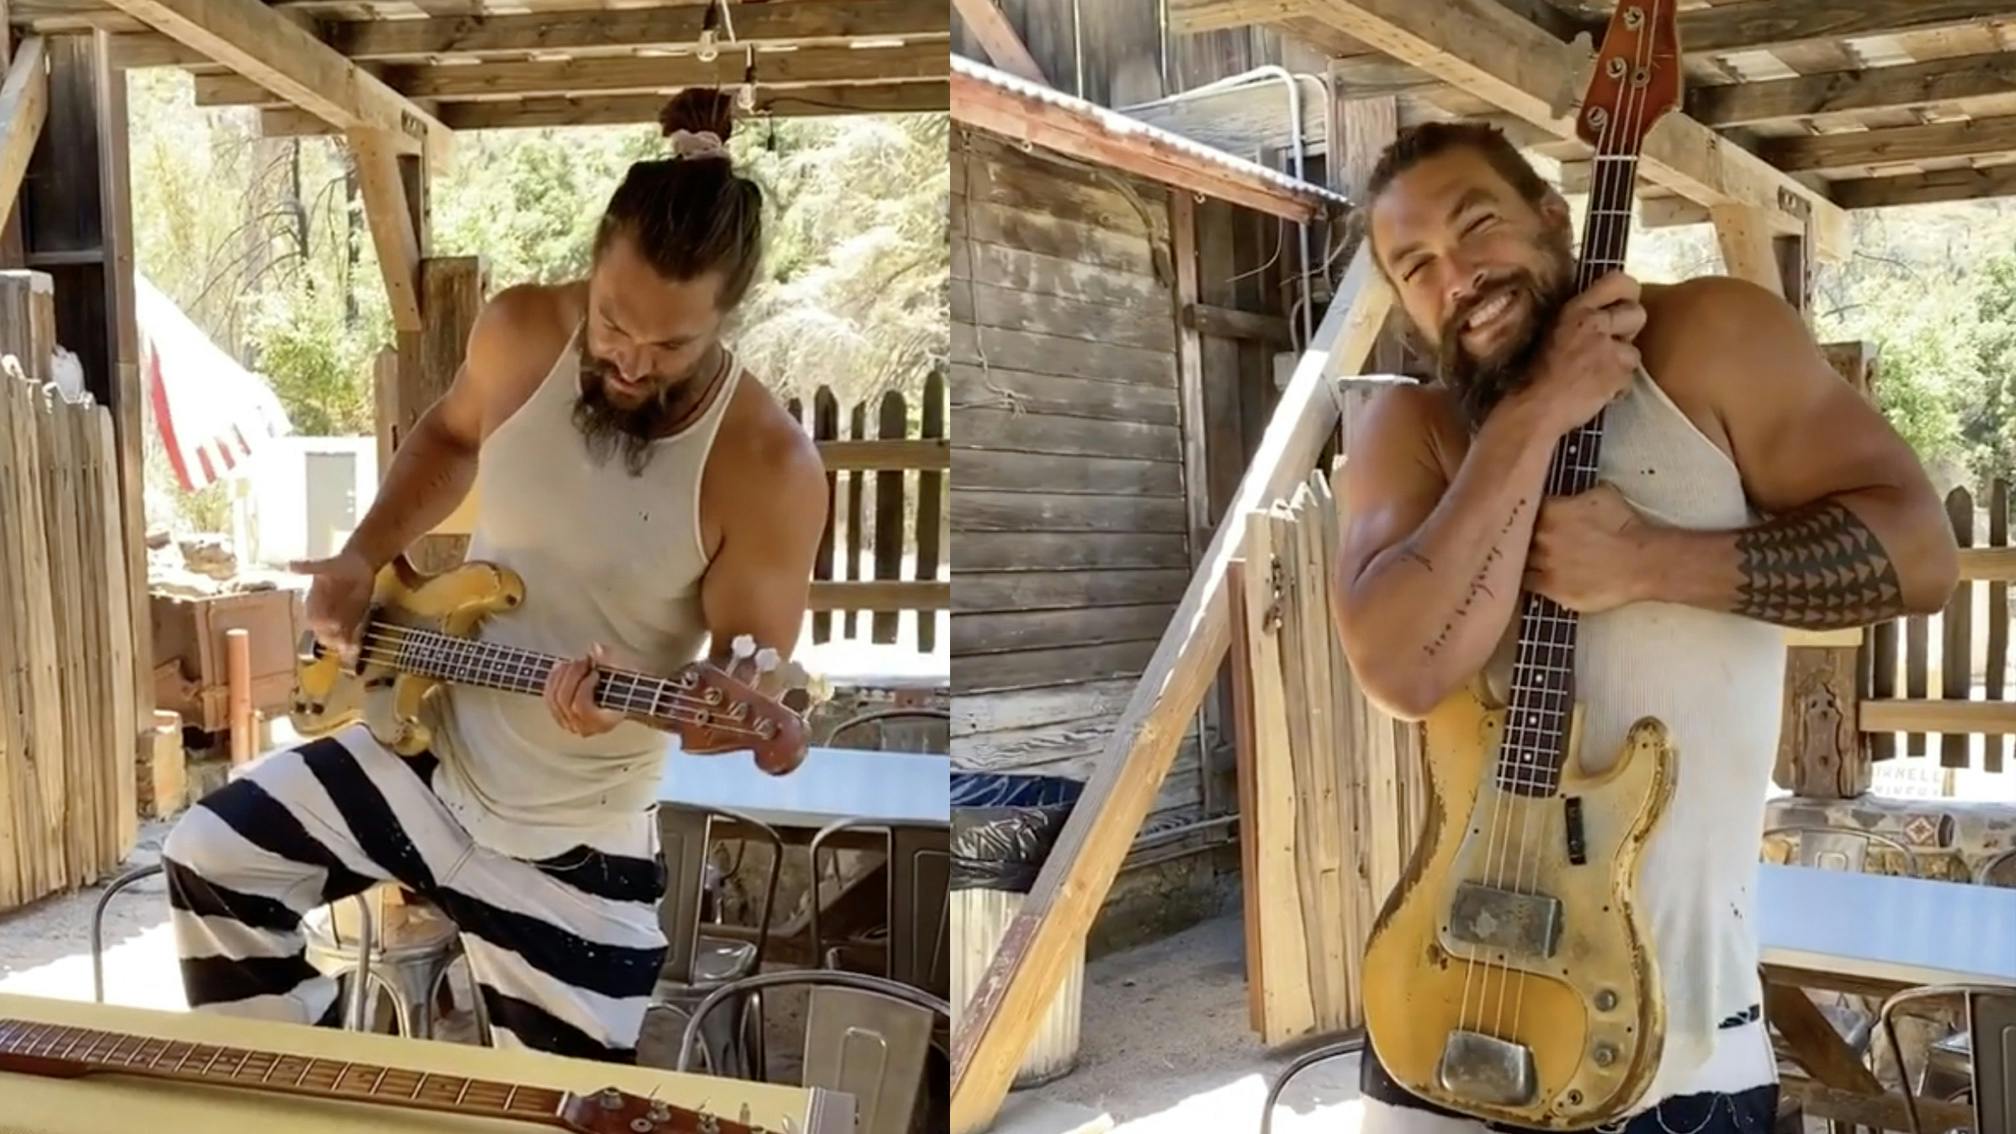 Tool's Sober got Jason Momoa into playing bass: "I could just feel the connection"